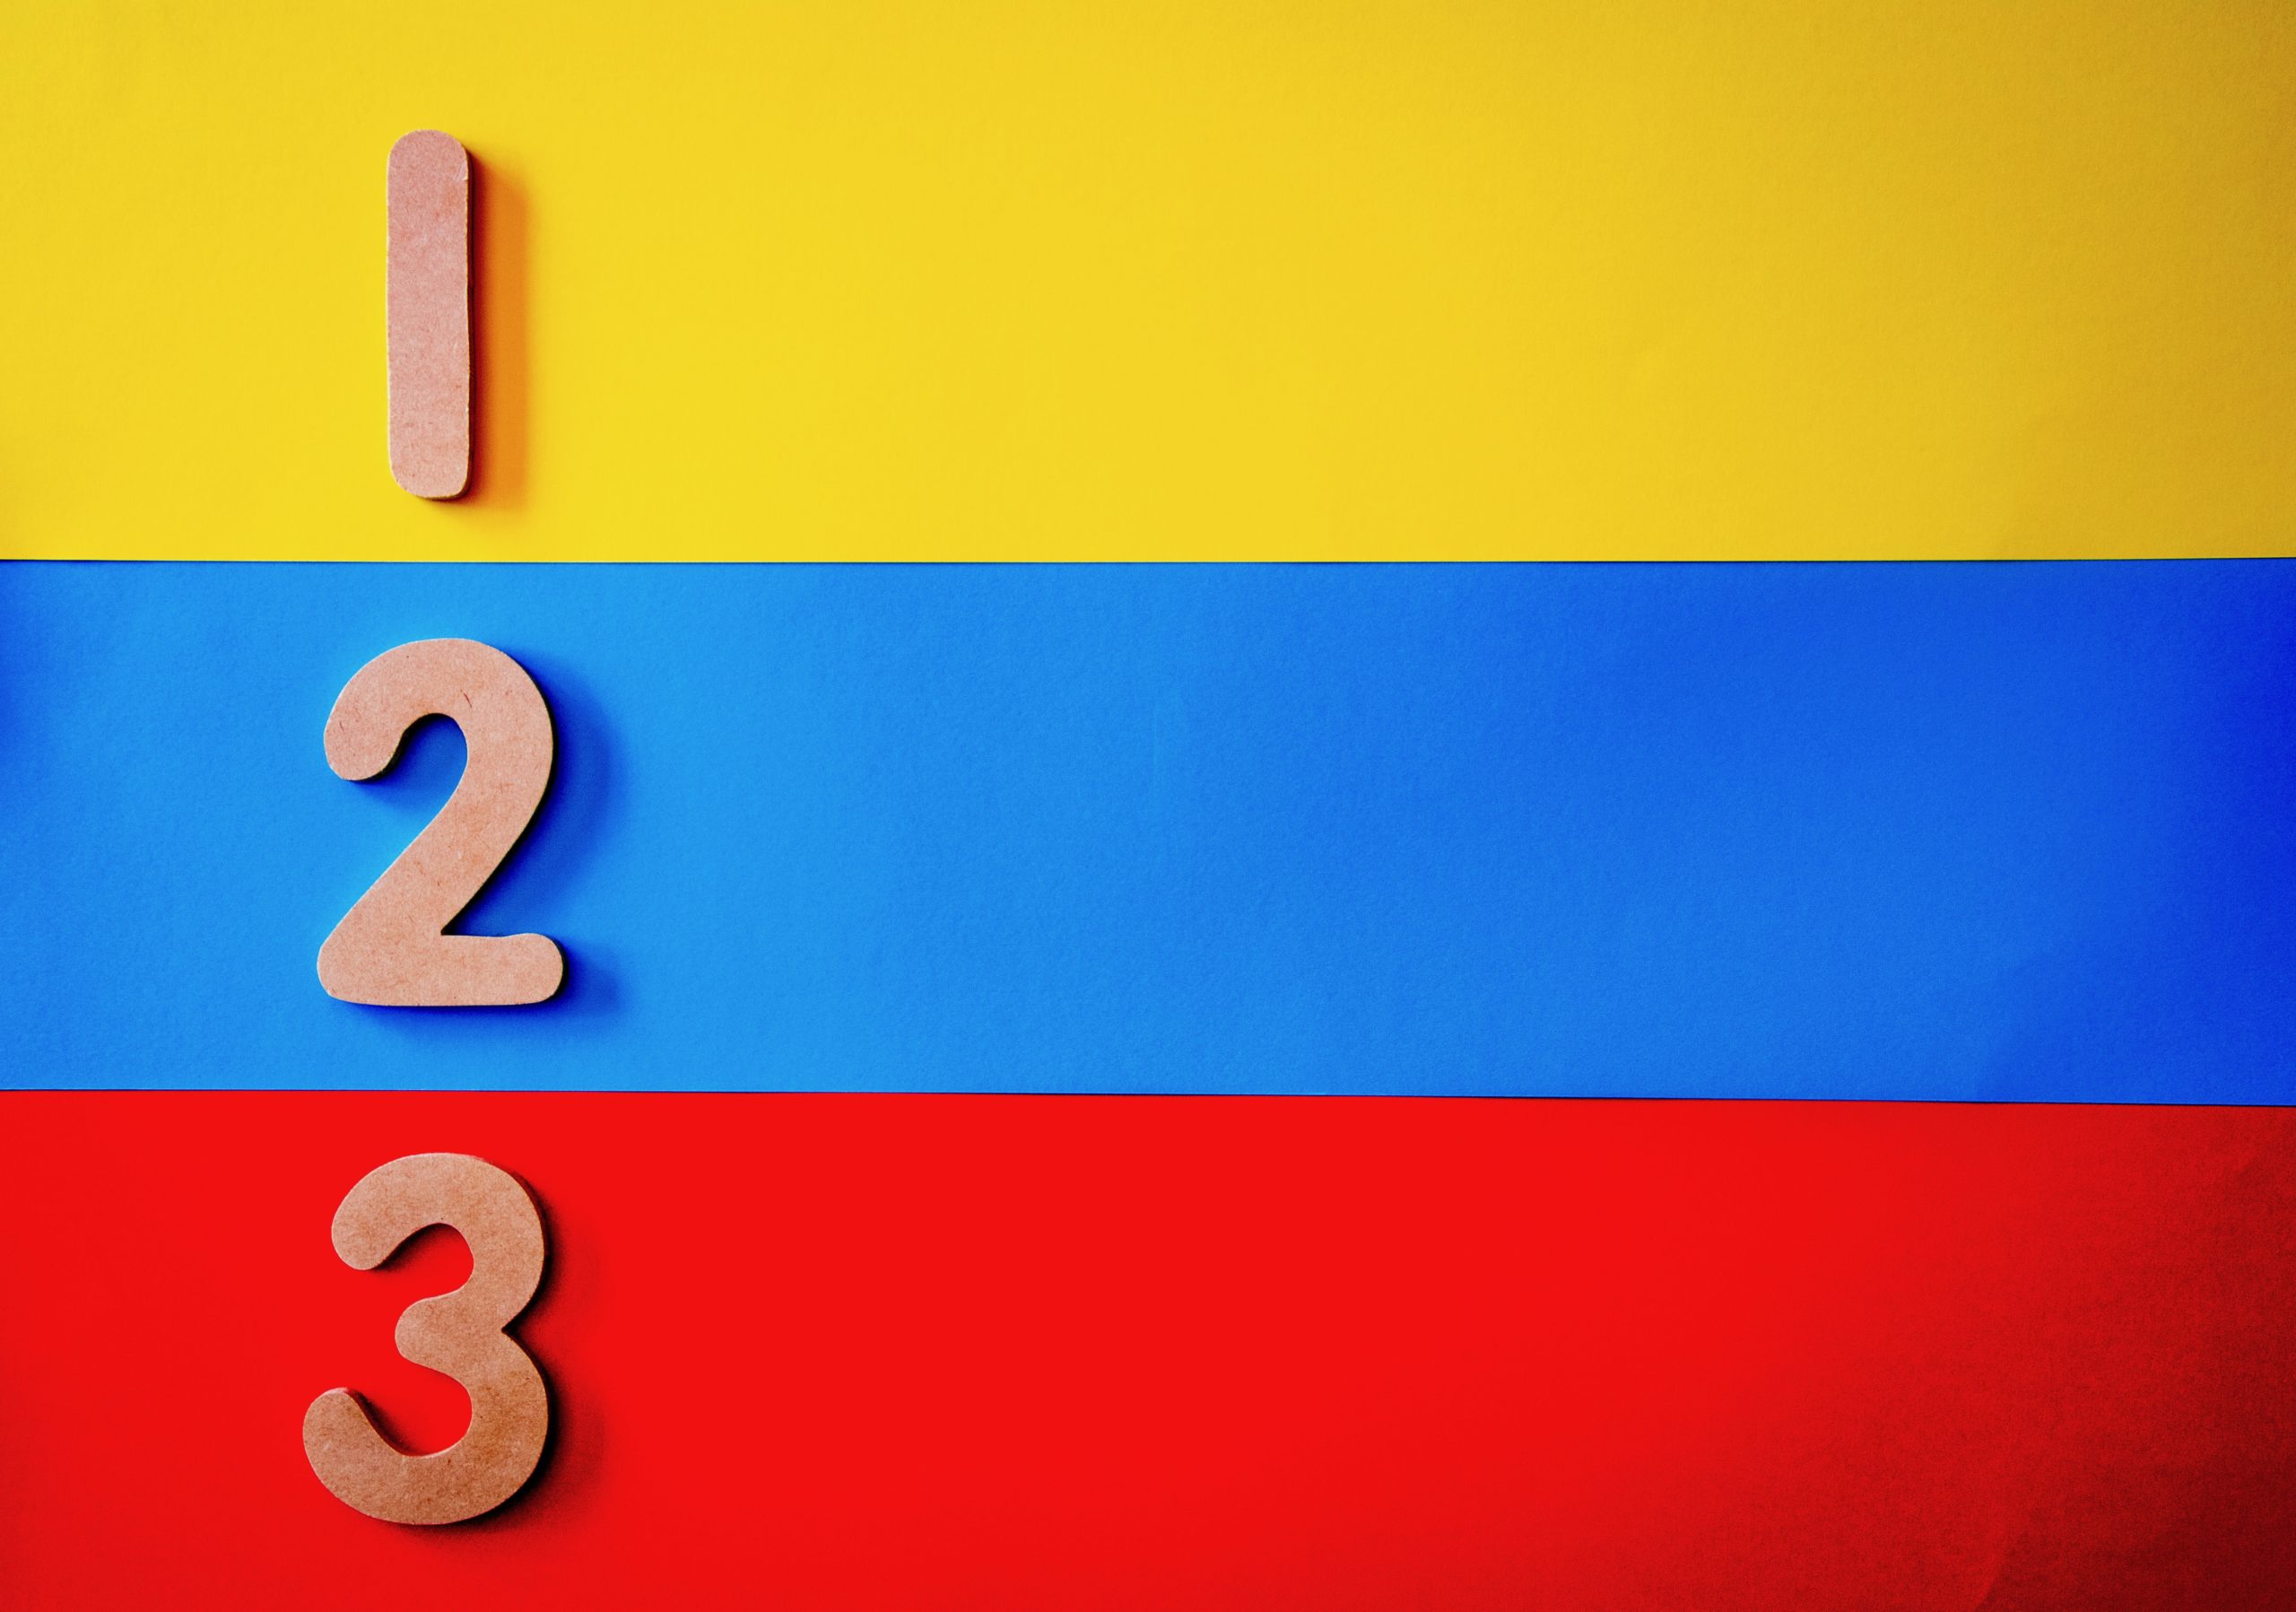 The wooden numbers 1, 2 and 3 are lying on a striped yellow, blue and red background.